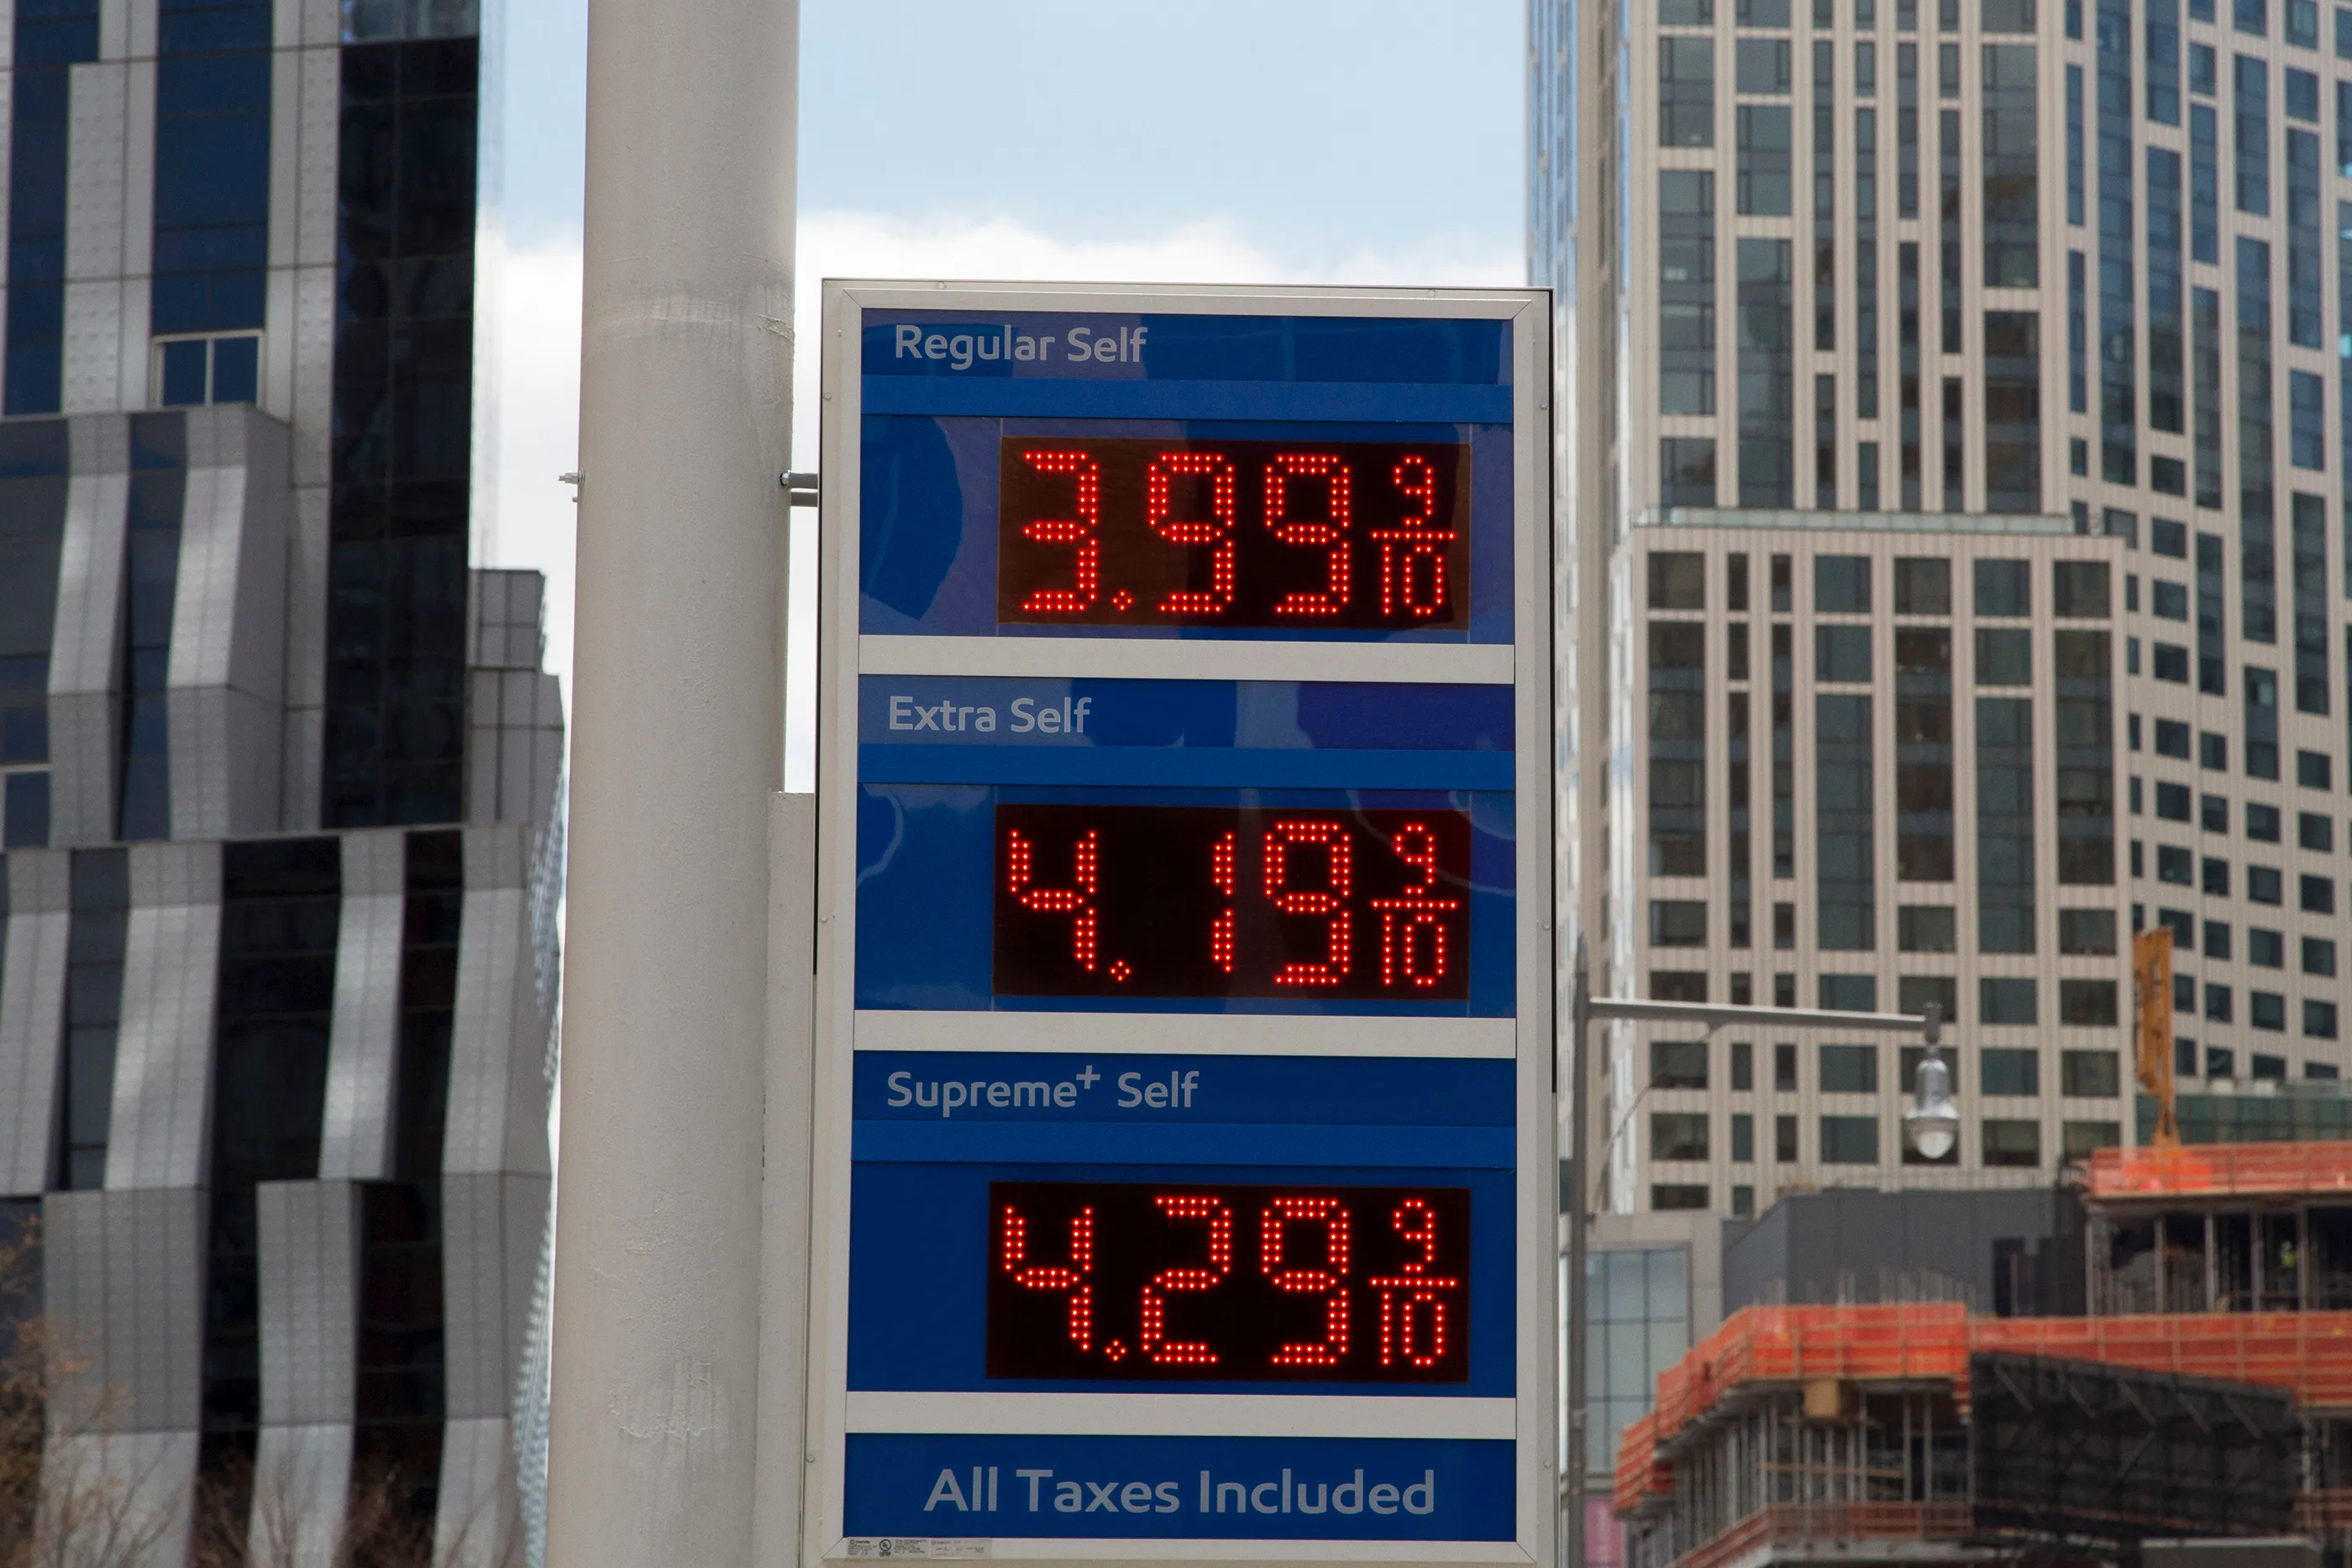 Gas Prices Are Going Up. Here's How Much That Will Cost You This Summer